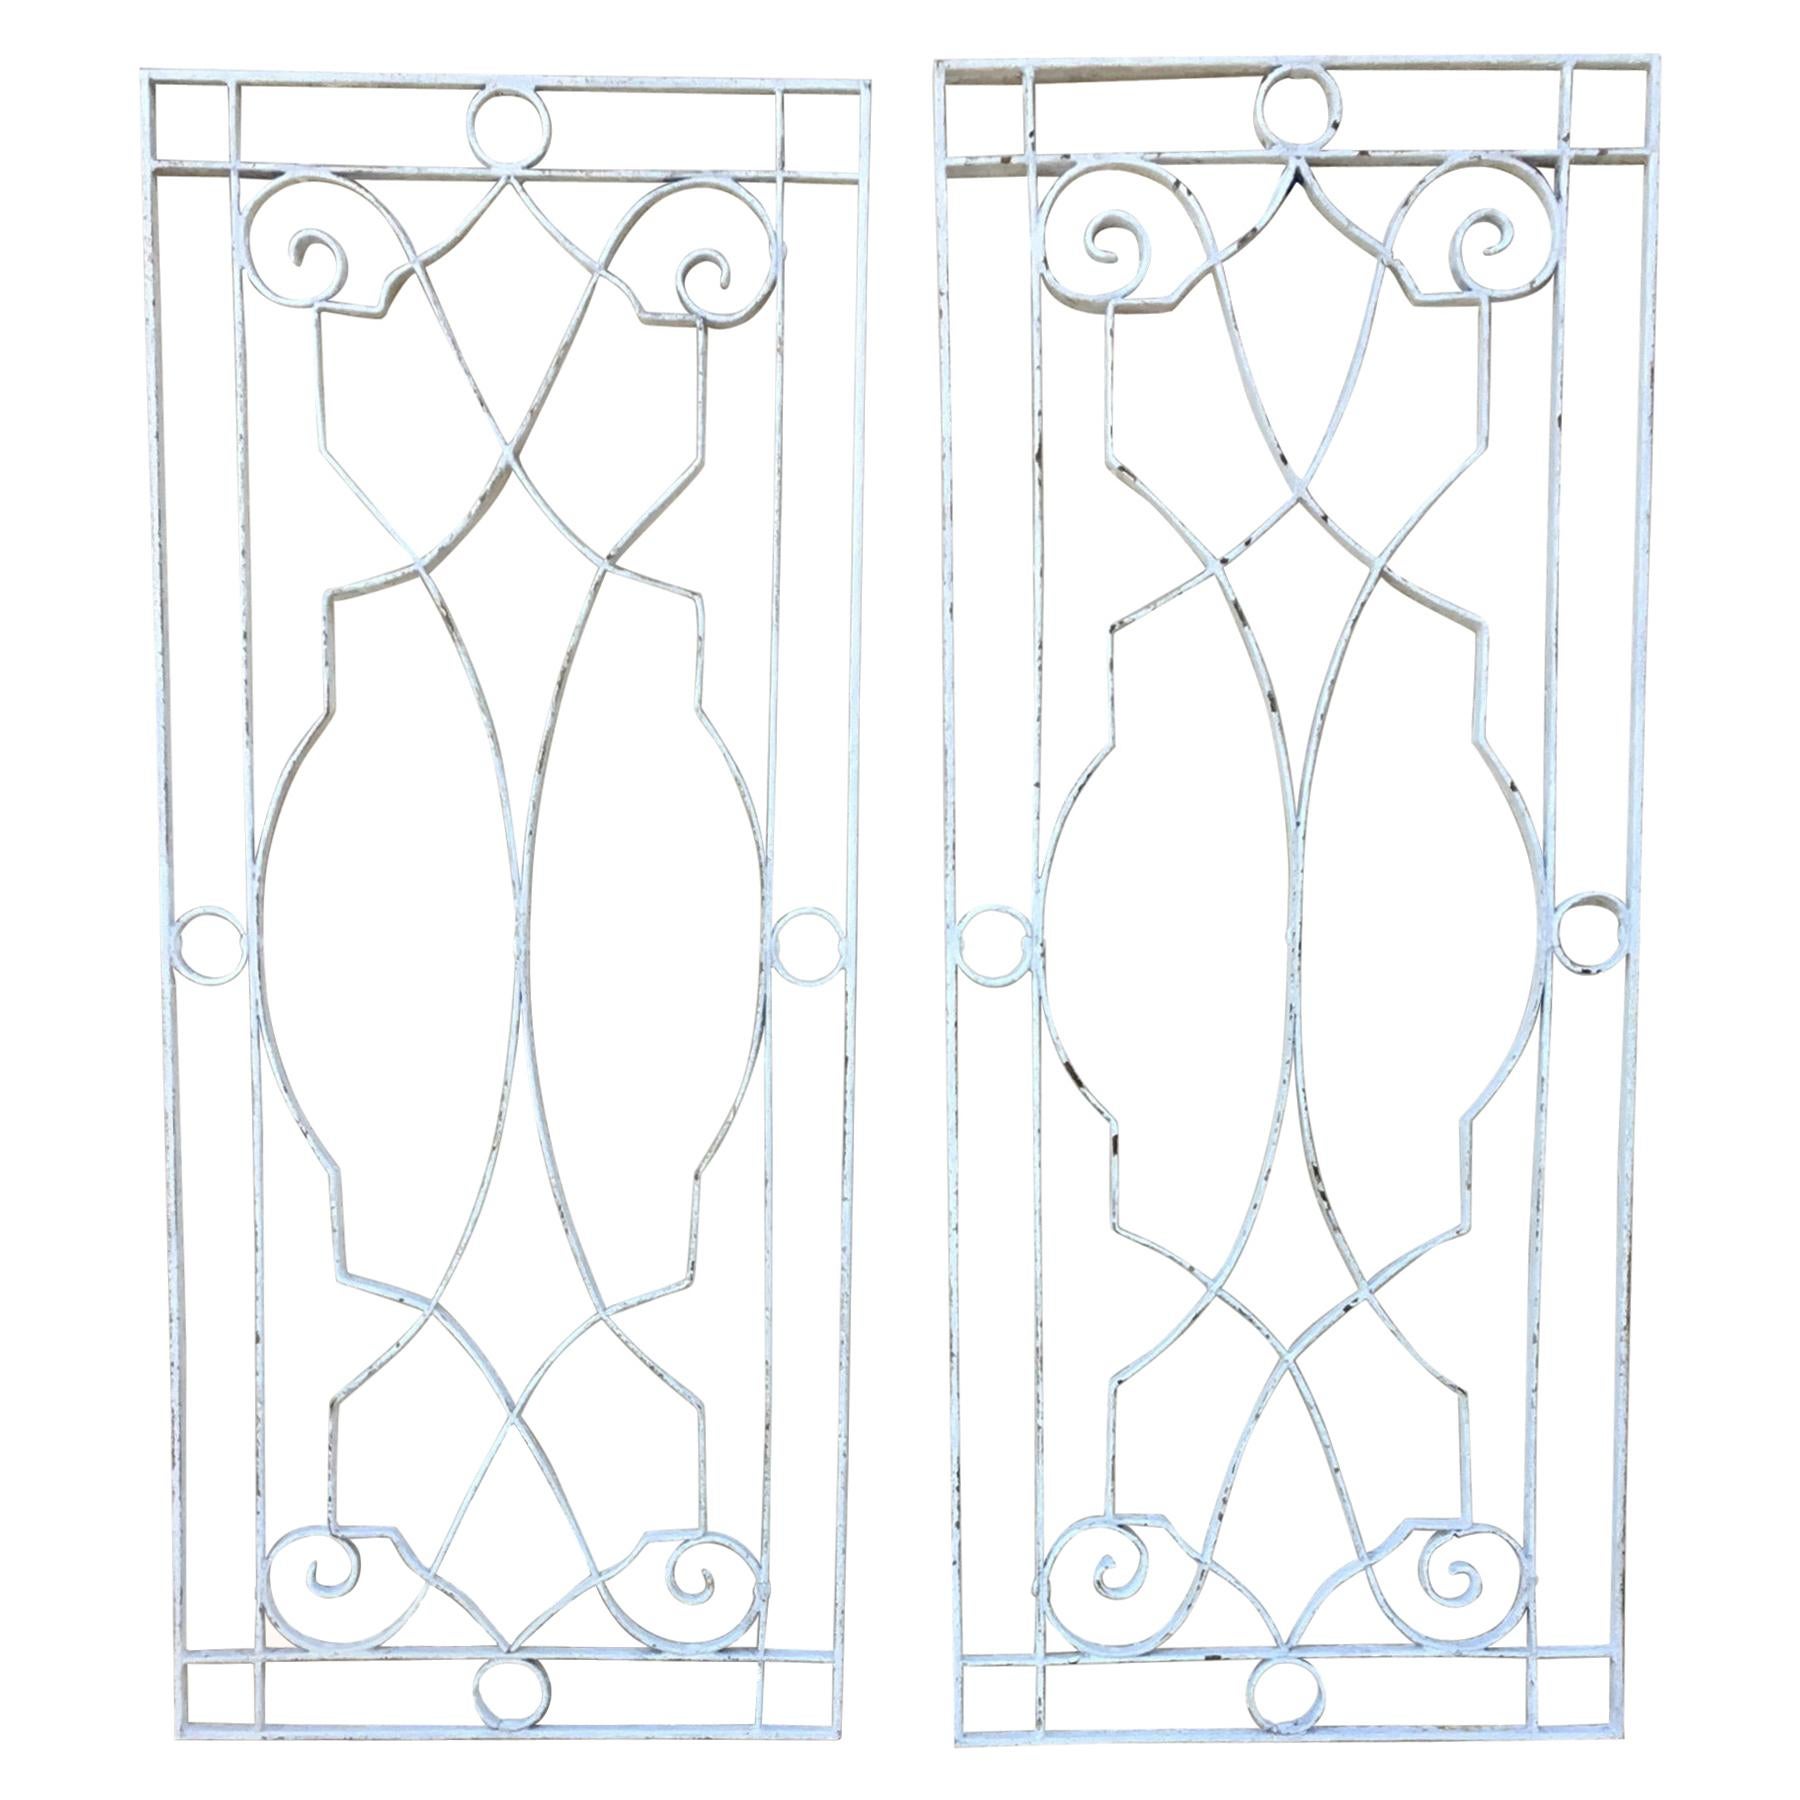 Pair of Large Architectural Iron Wall Hanging